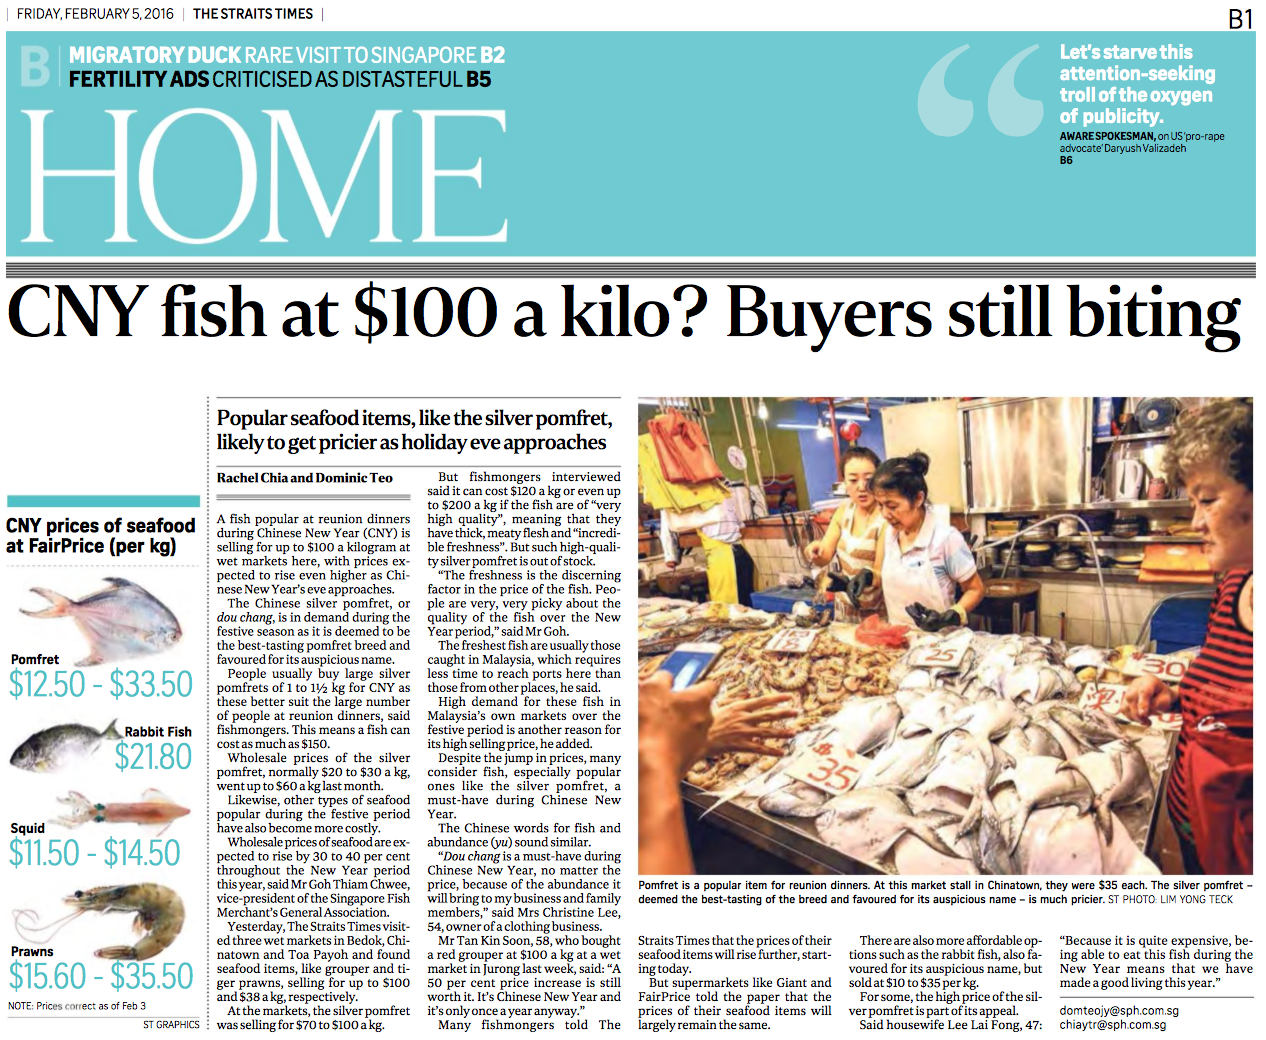  Fish prices feature for The Straits Times (www.straitstimes.com) 